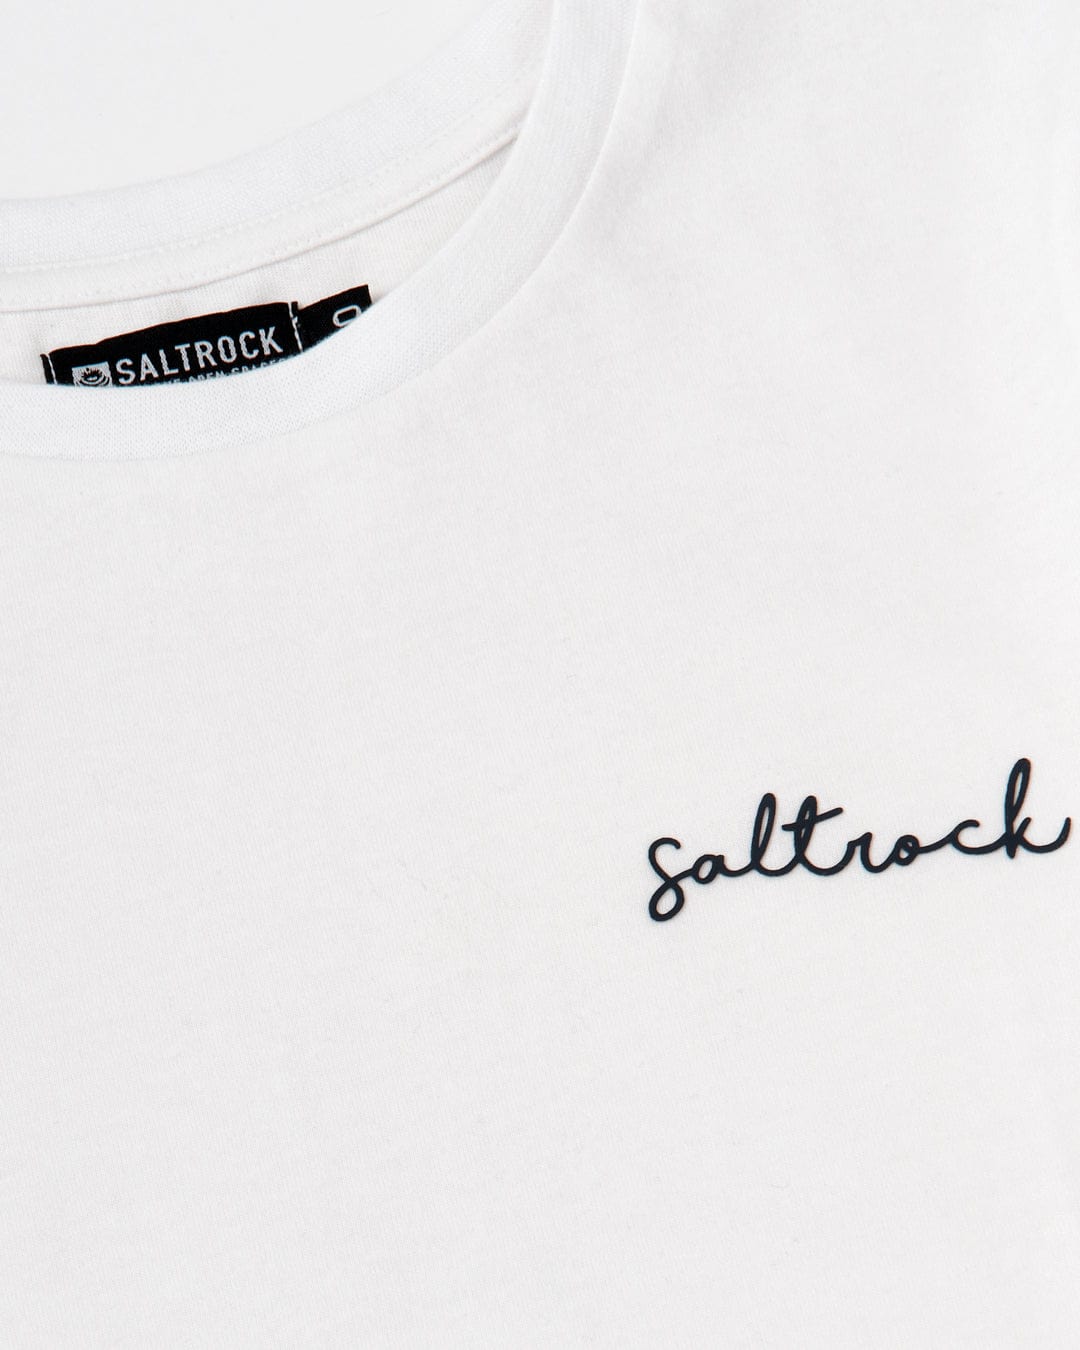 A Velator - Womens Short Sleeve T-Shirt - White with the word Saltrock embroidered on it, showcasing the Saltrock branding.